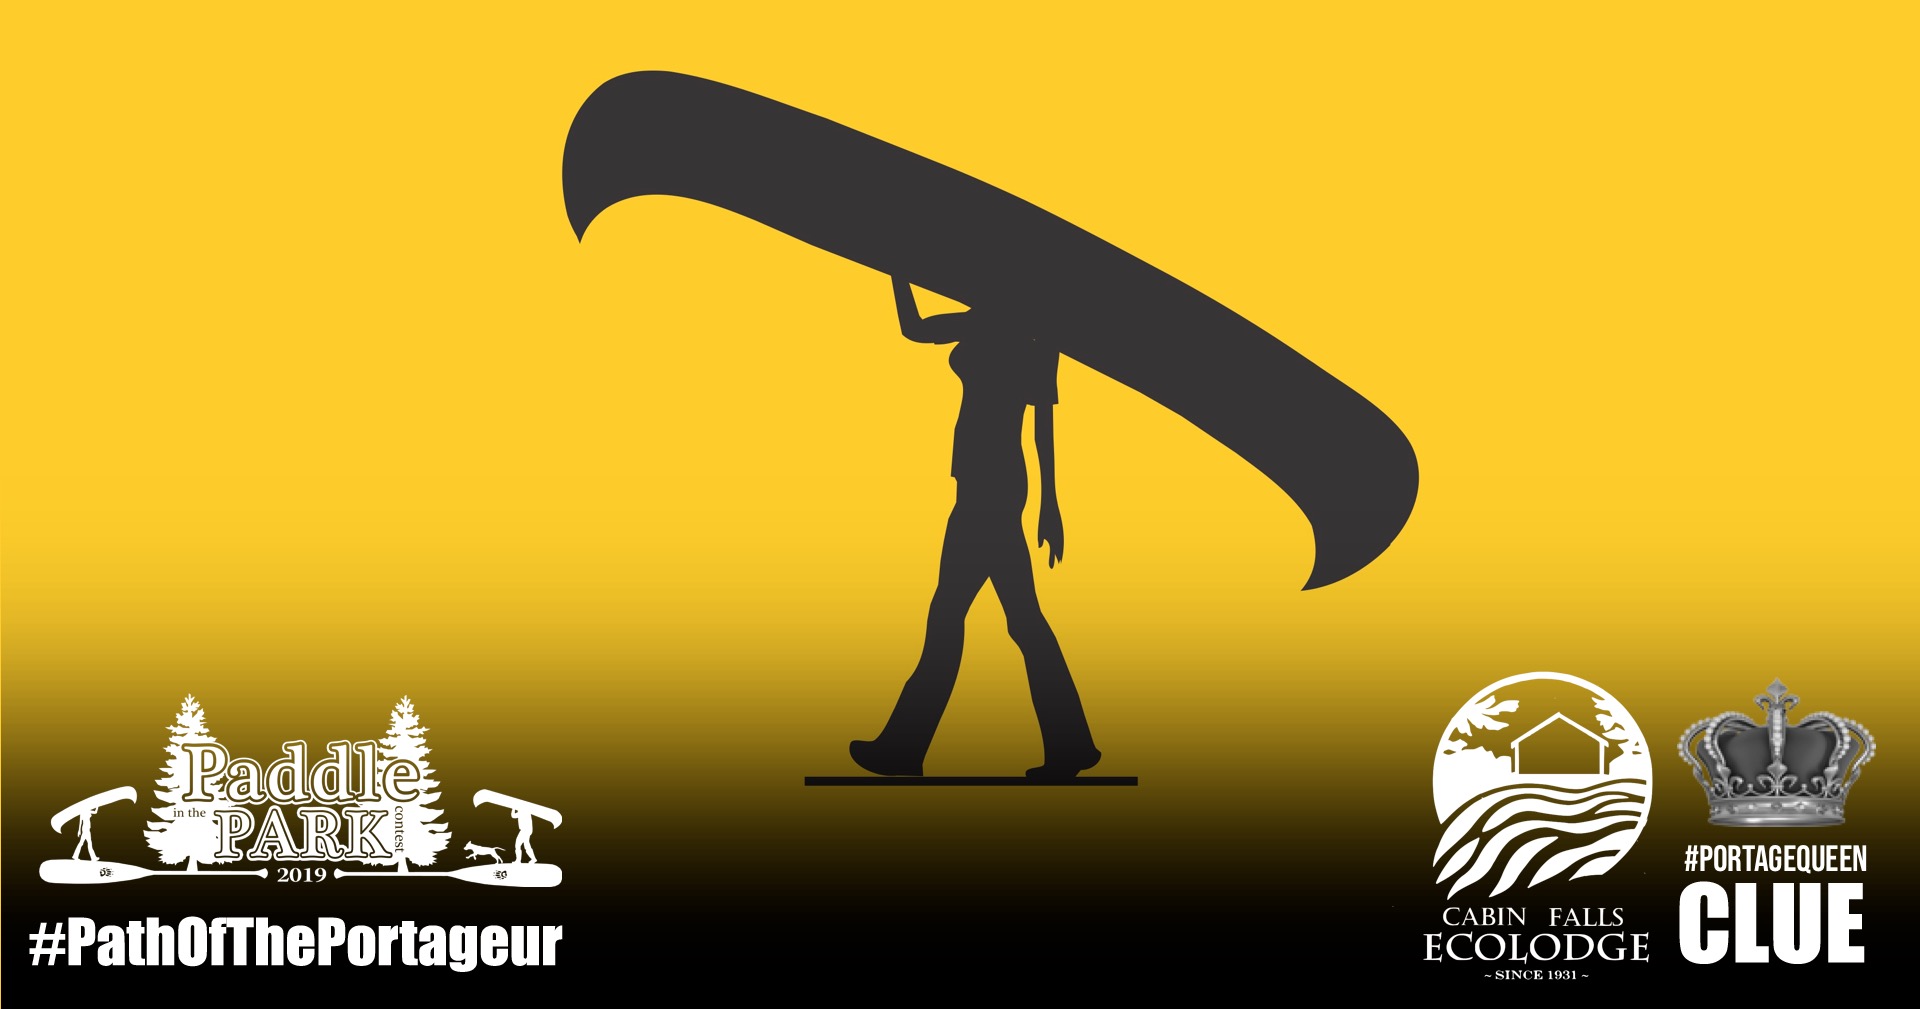 silhouette of a woman portaging a canoe on yellow background with Paddle in the Park Contest and Cabin Falls EcoLodge logos